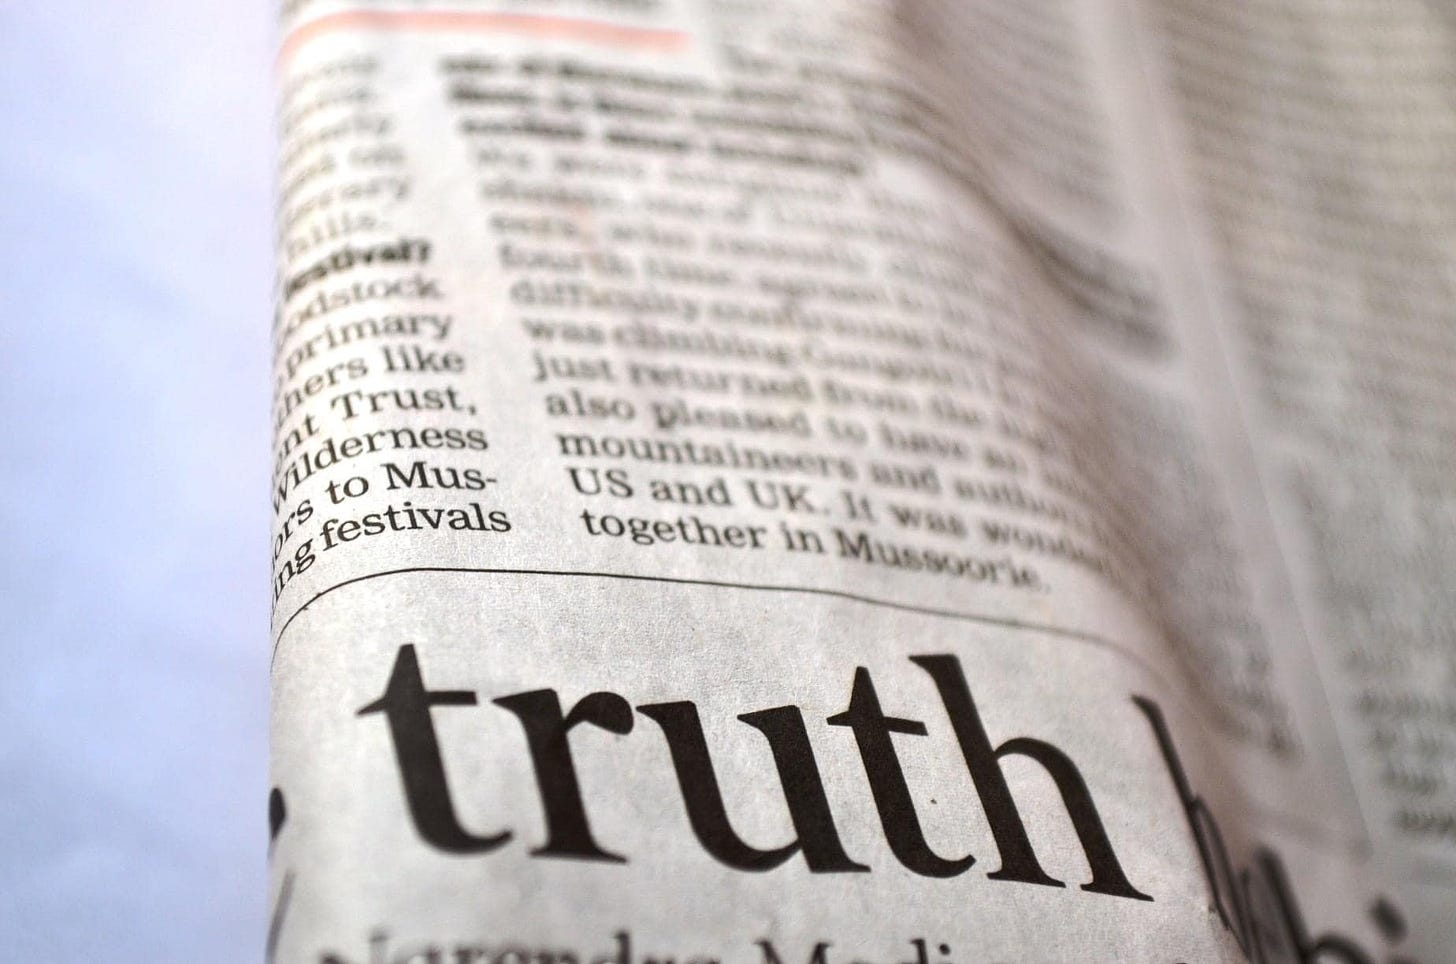 The word "Truth" printed in large type on a newspaper.